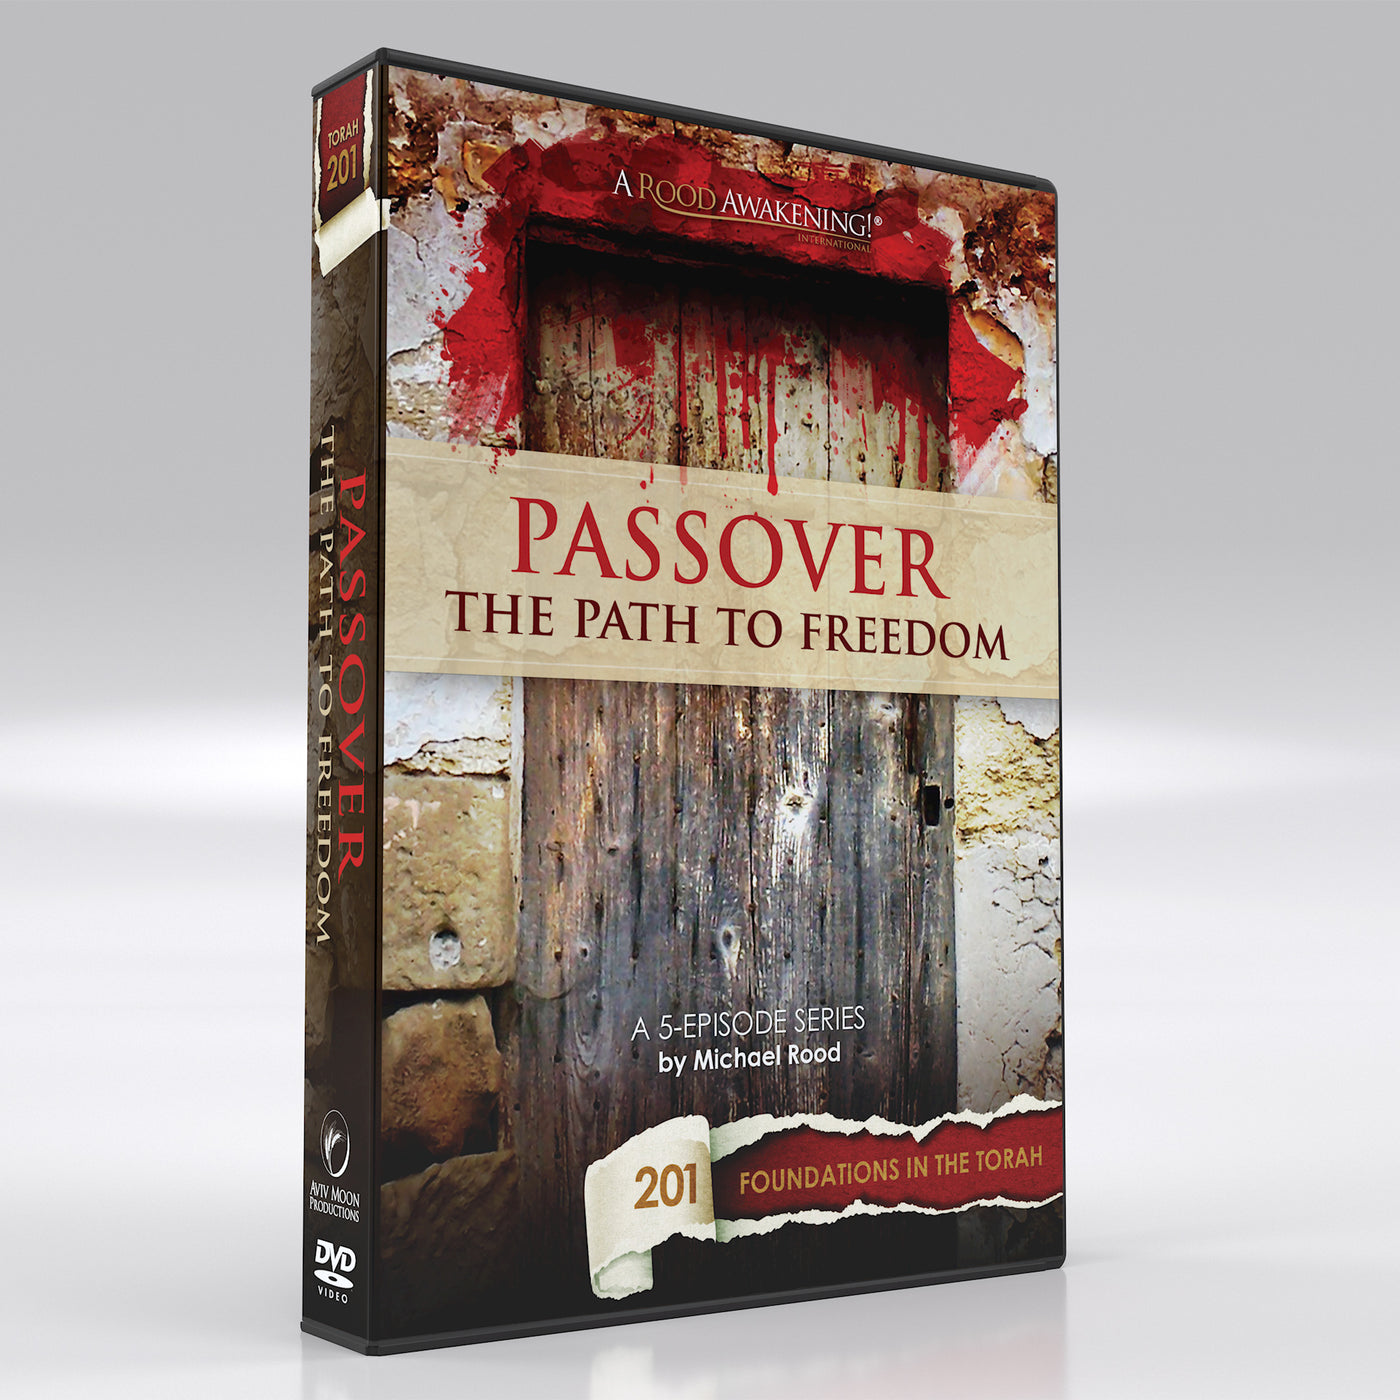 Passover: The Path to Freedom